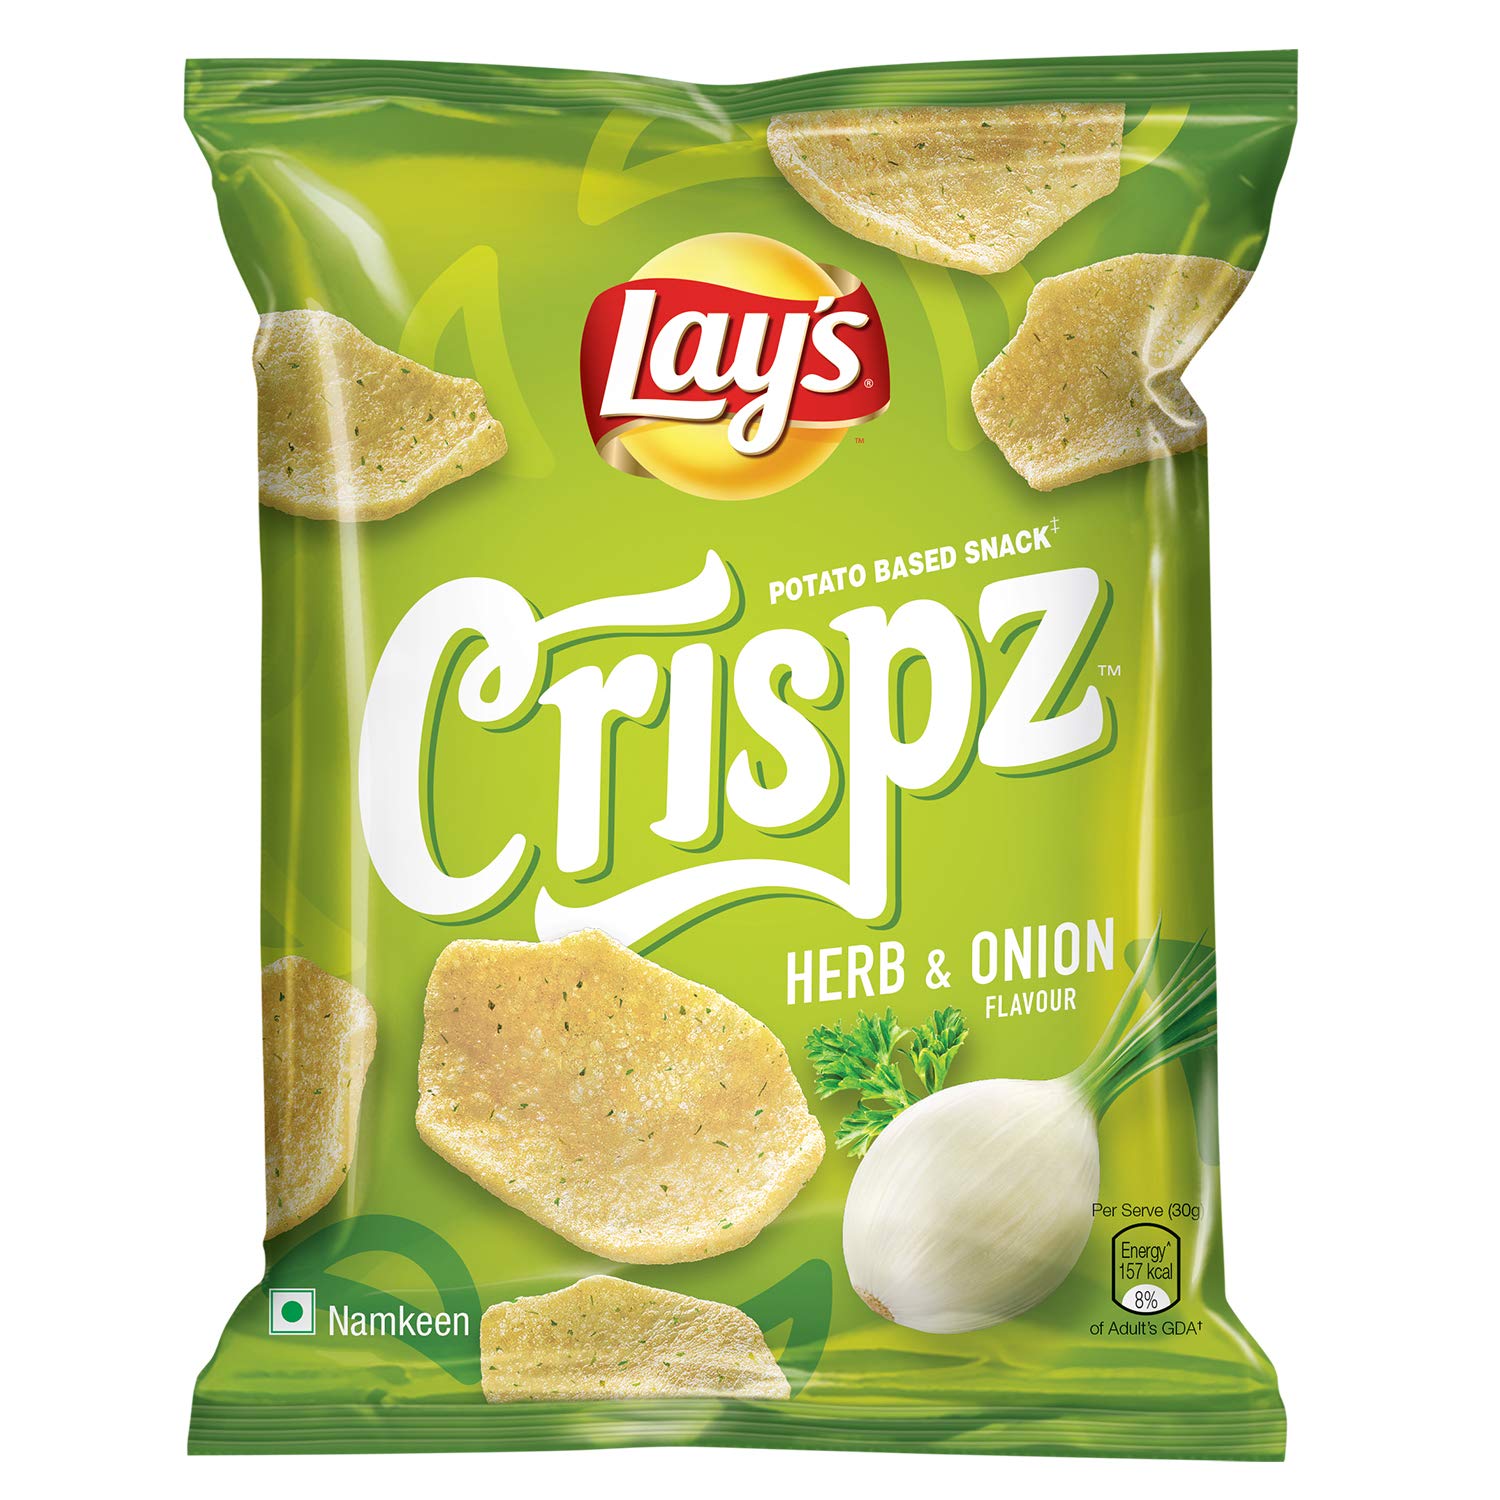 Lay's Crispz, Herb and Onion